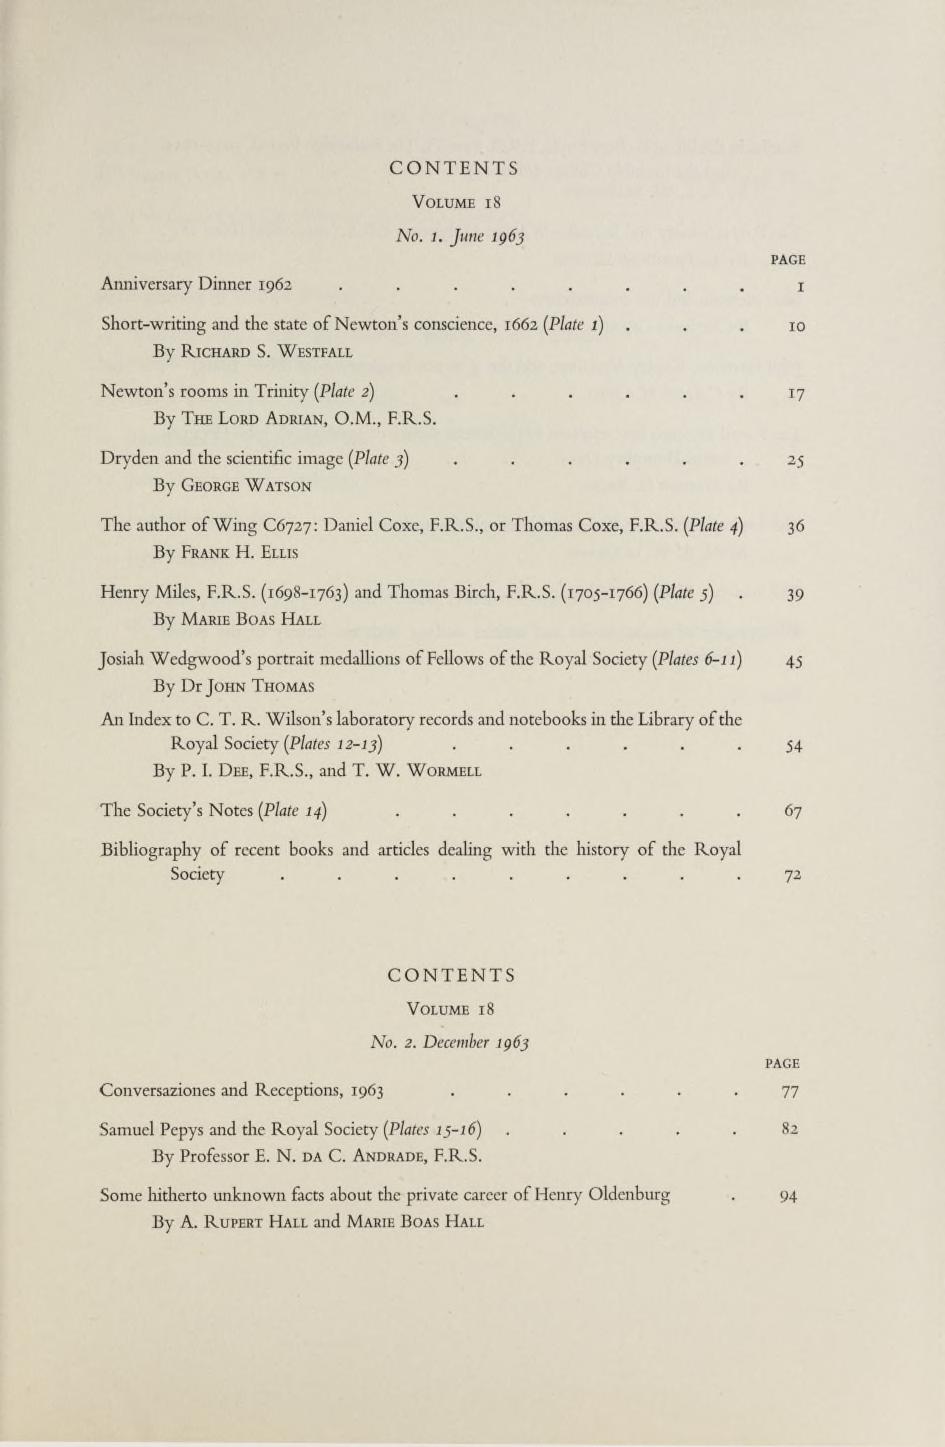 CONTENTS V o l u m e 18 No. 1. June Anniversary Dinner 1962........ 1 Short-writing and the state of Newton s conscience, 1662 (Plate.. 1 0 By R ichard S.